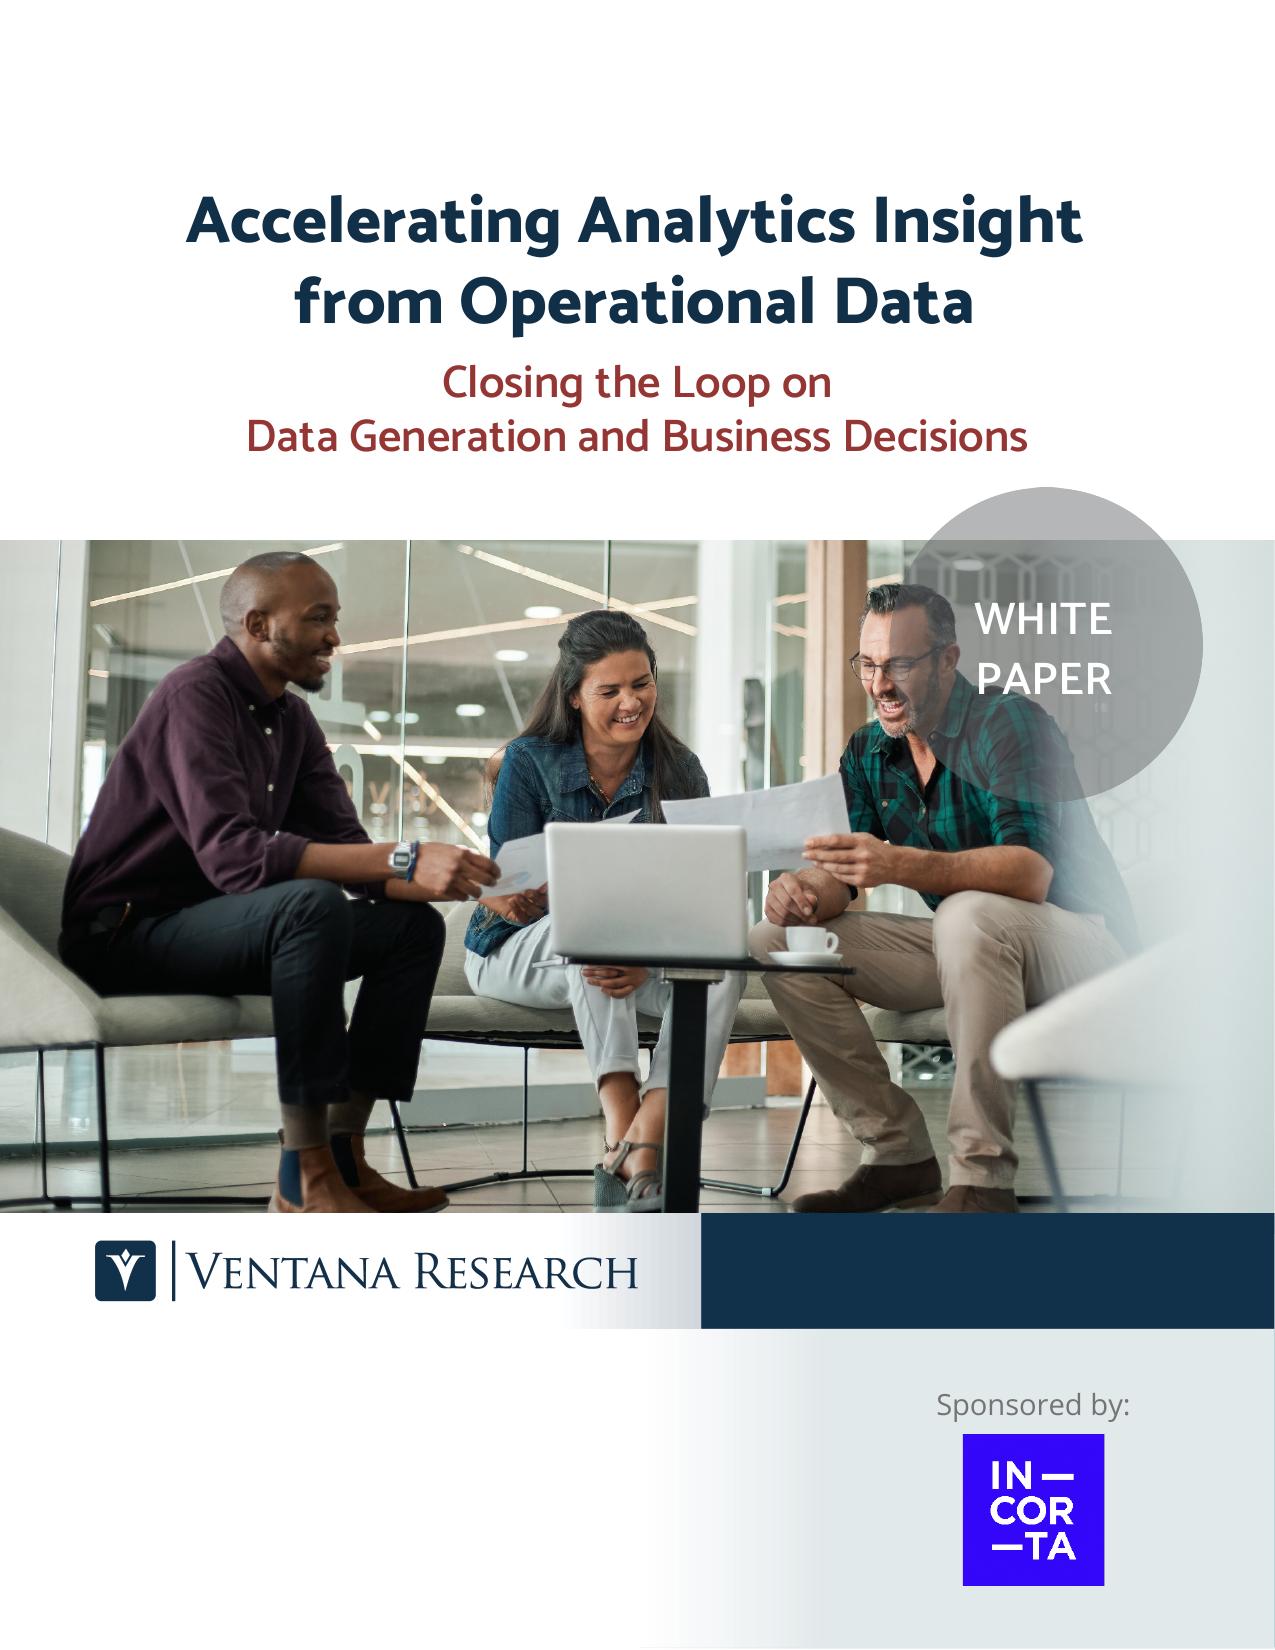 Accelerating Analytics Insight from Operational Data